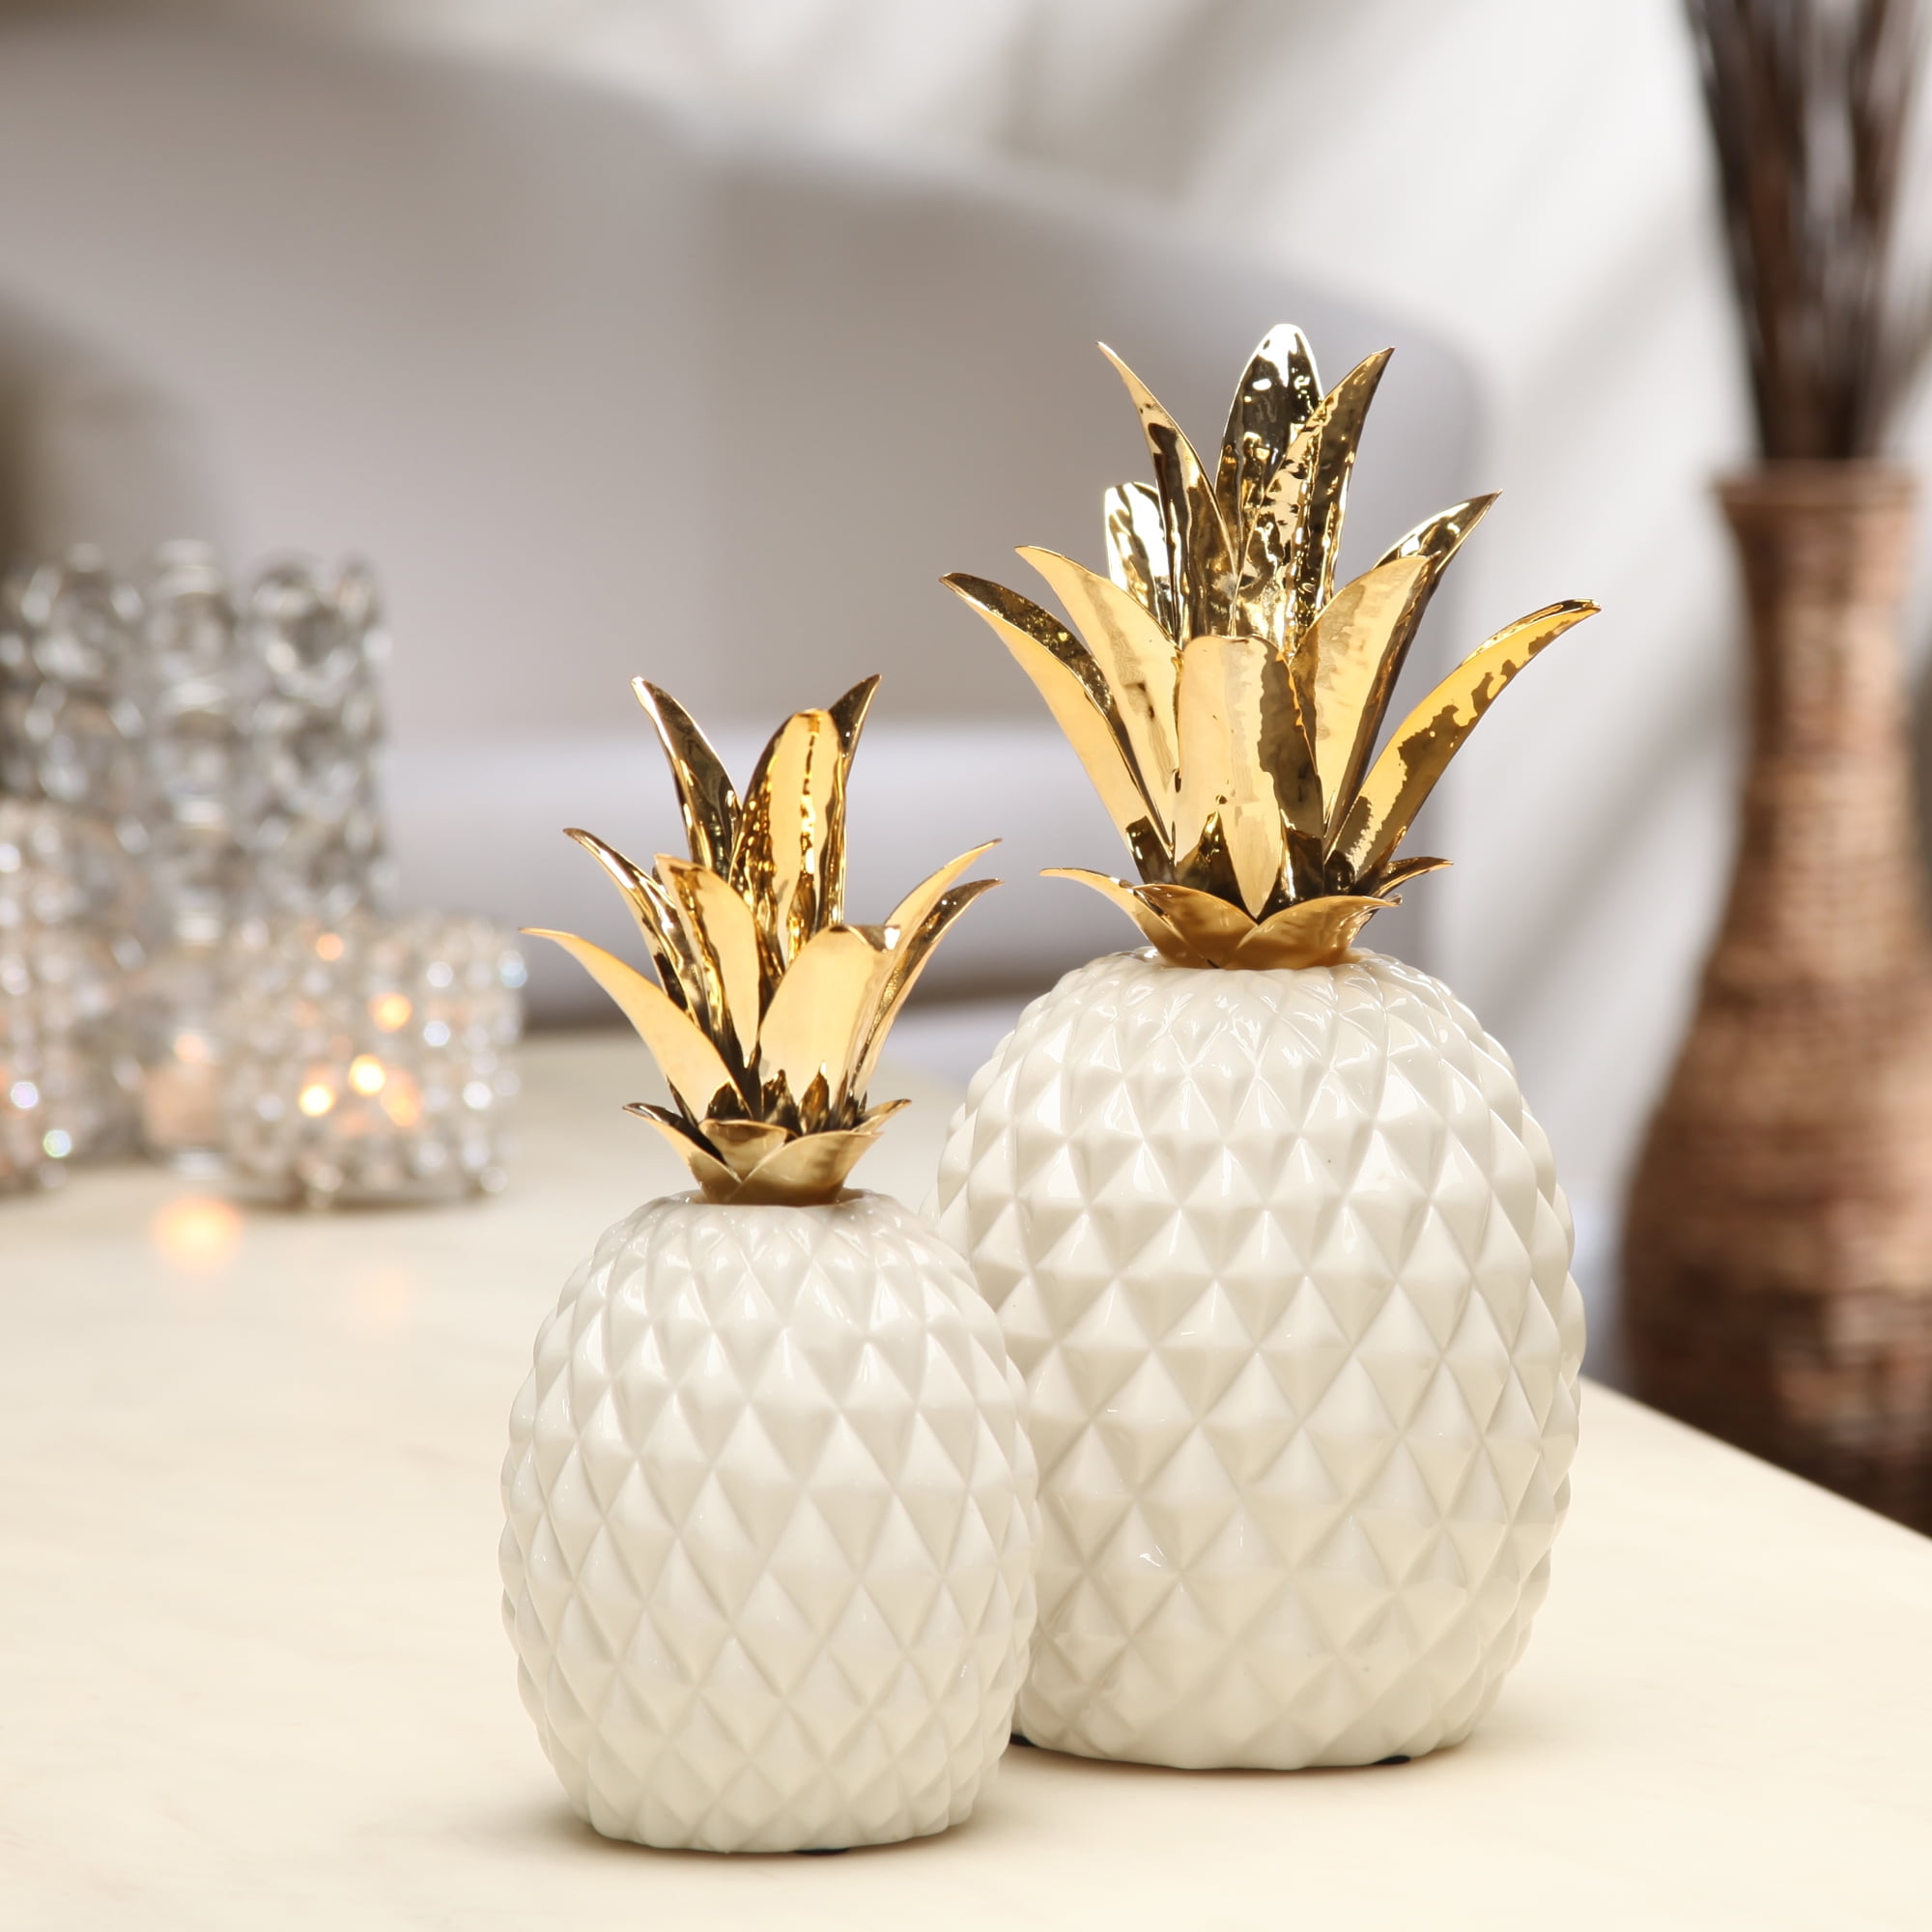 Better Homes And Gardens Decorative Ceramic Pineapple White And